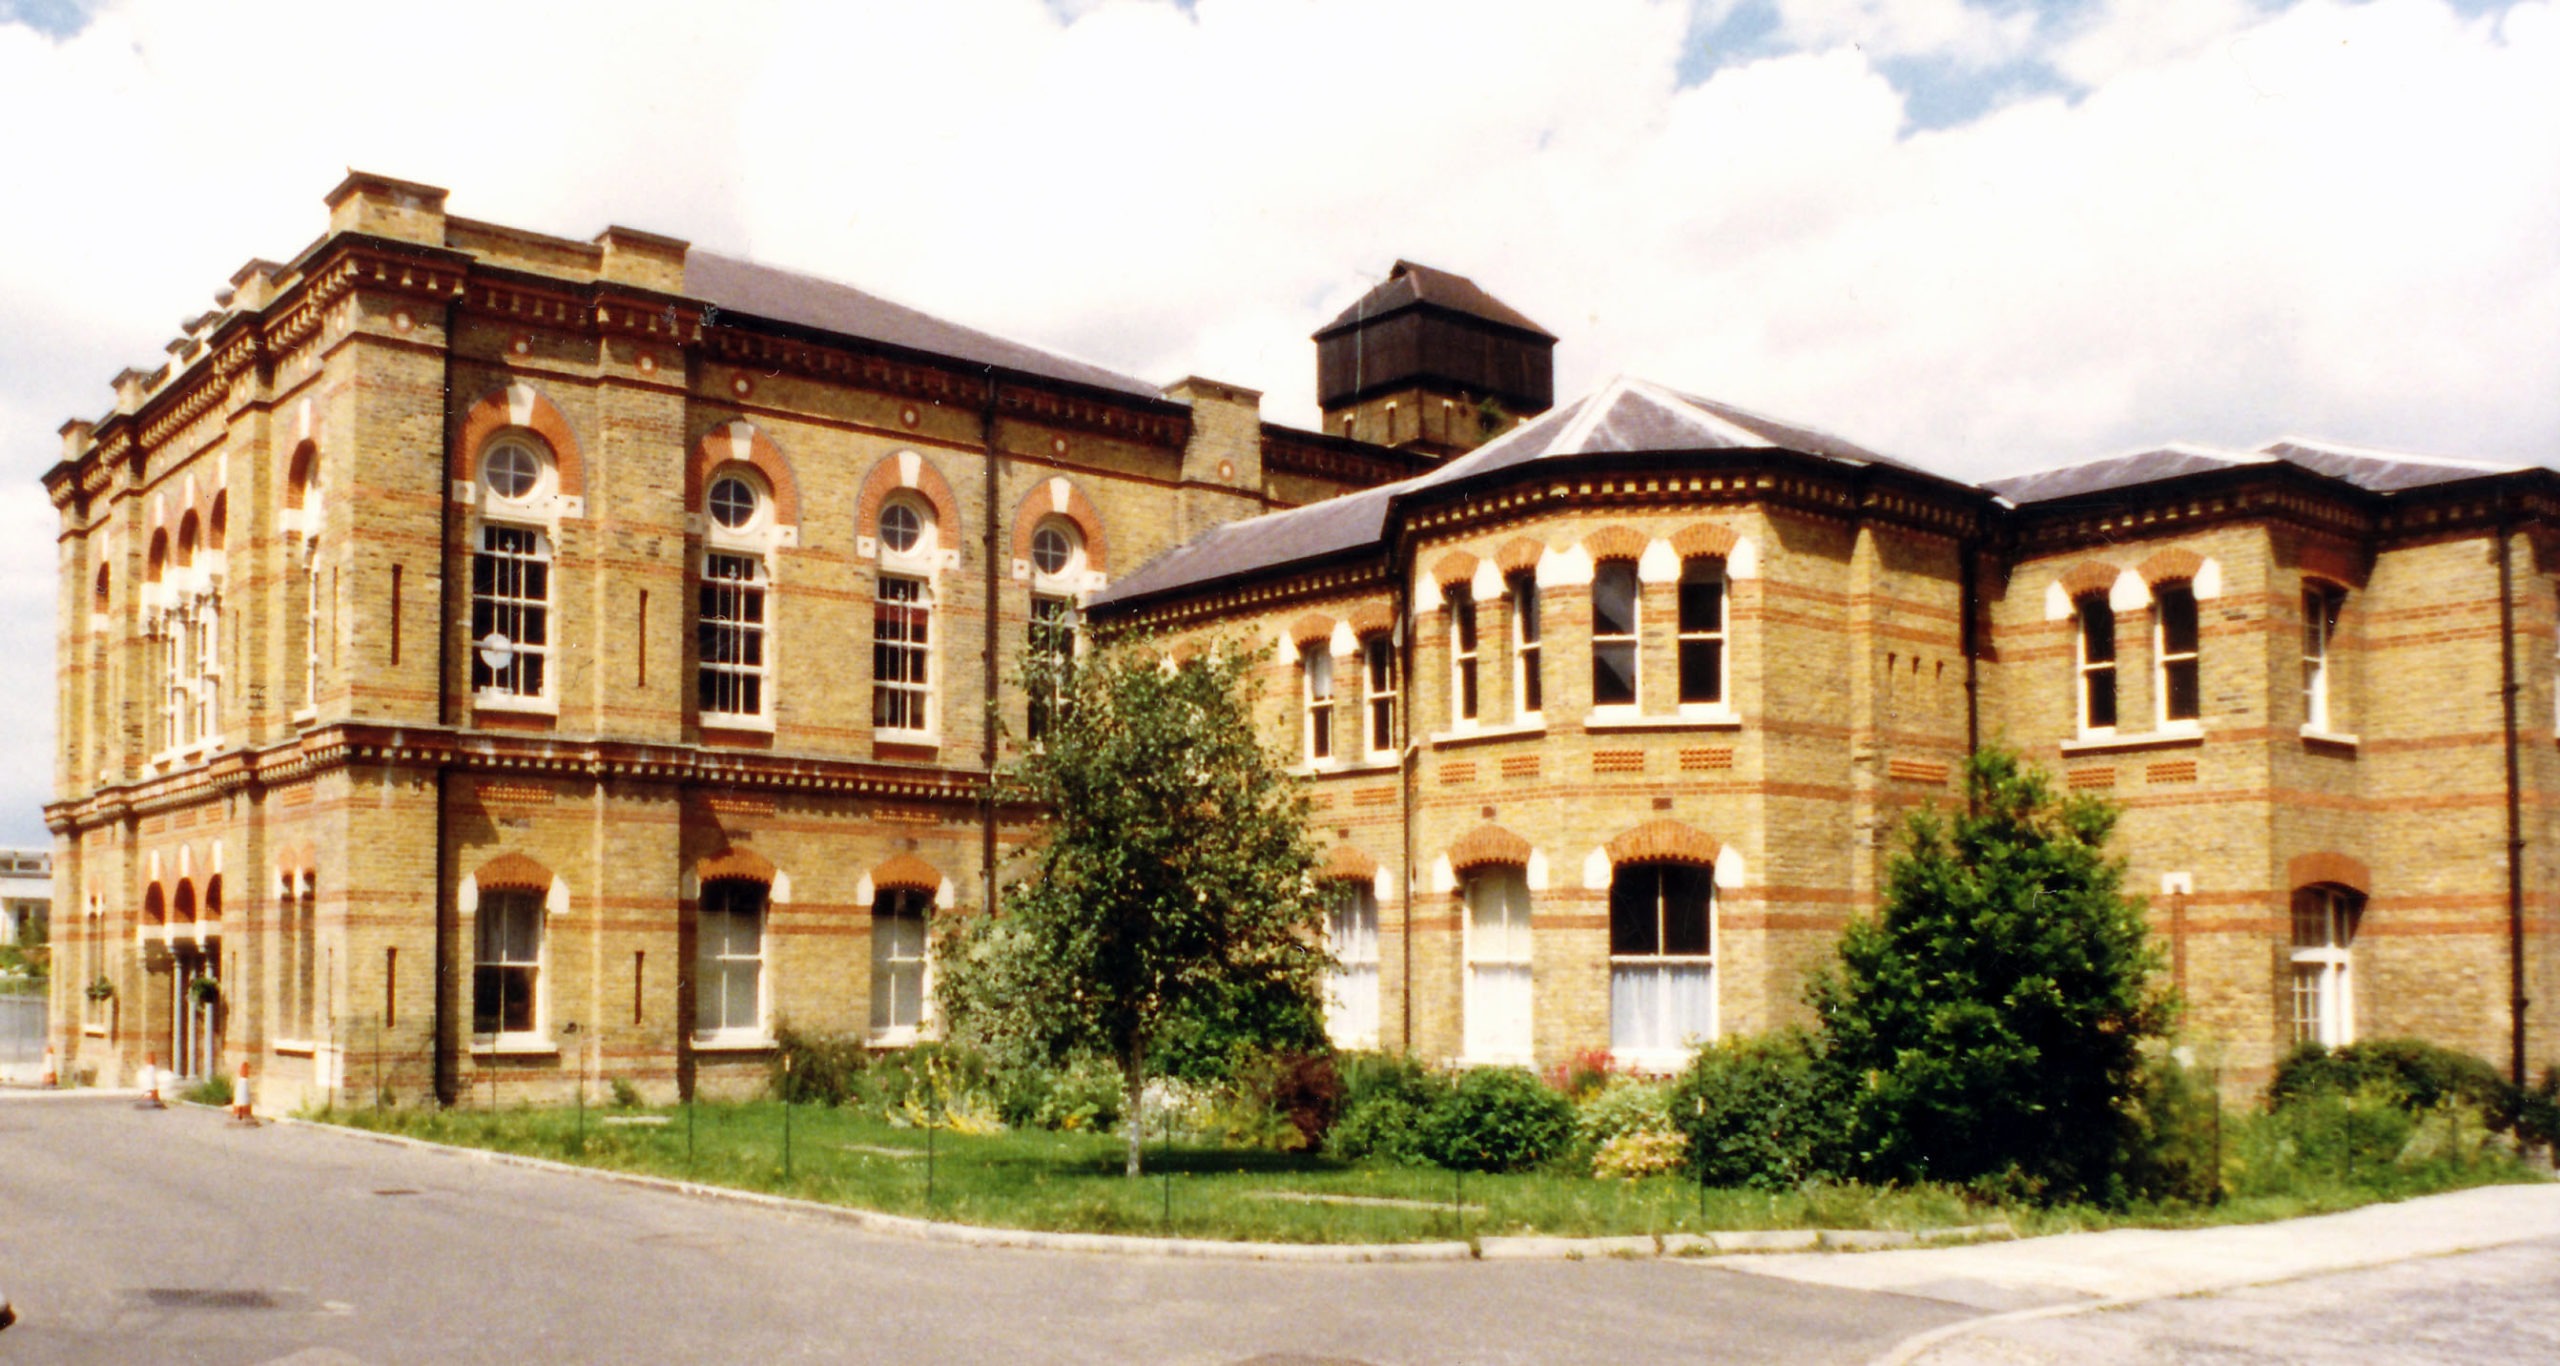 The old Master House at Lambeth Workhouse, now the Cinema Museum